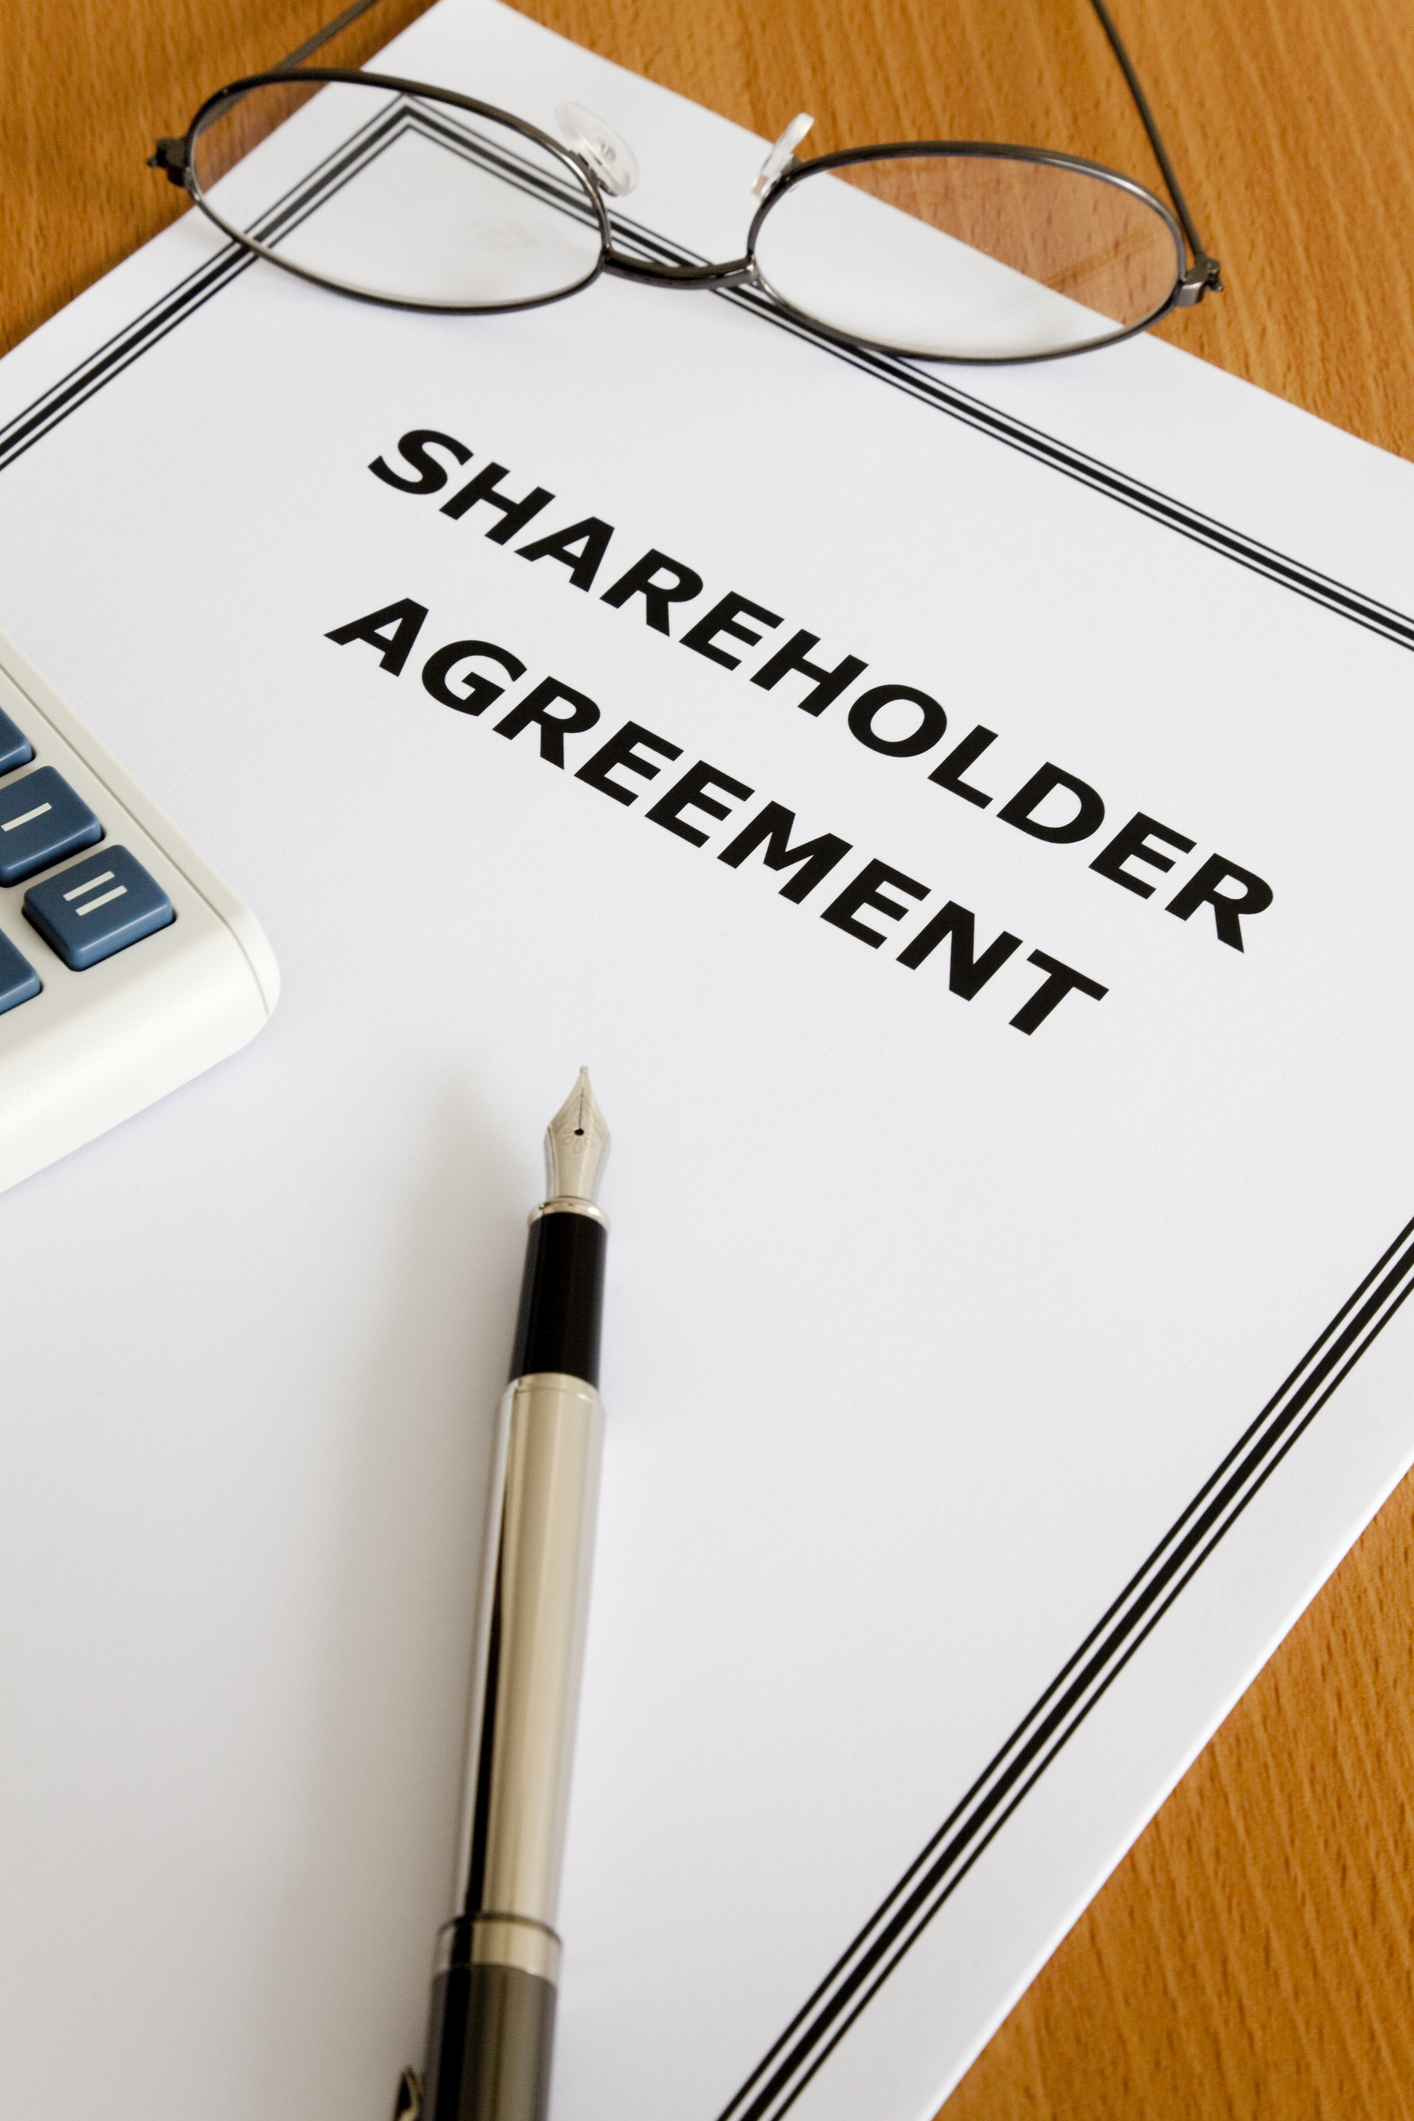 Does the Housing Stability and Tenant Protection Act Negatively Affect Potential Co-Op Shareholders?